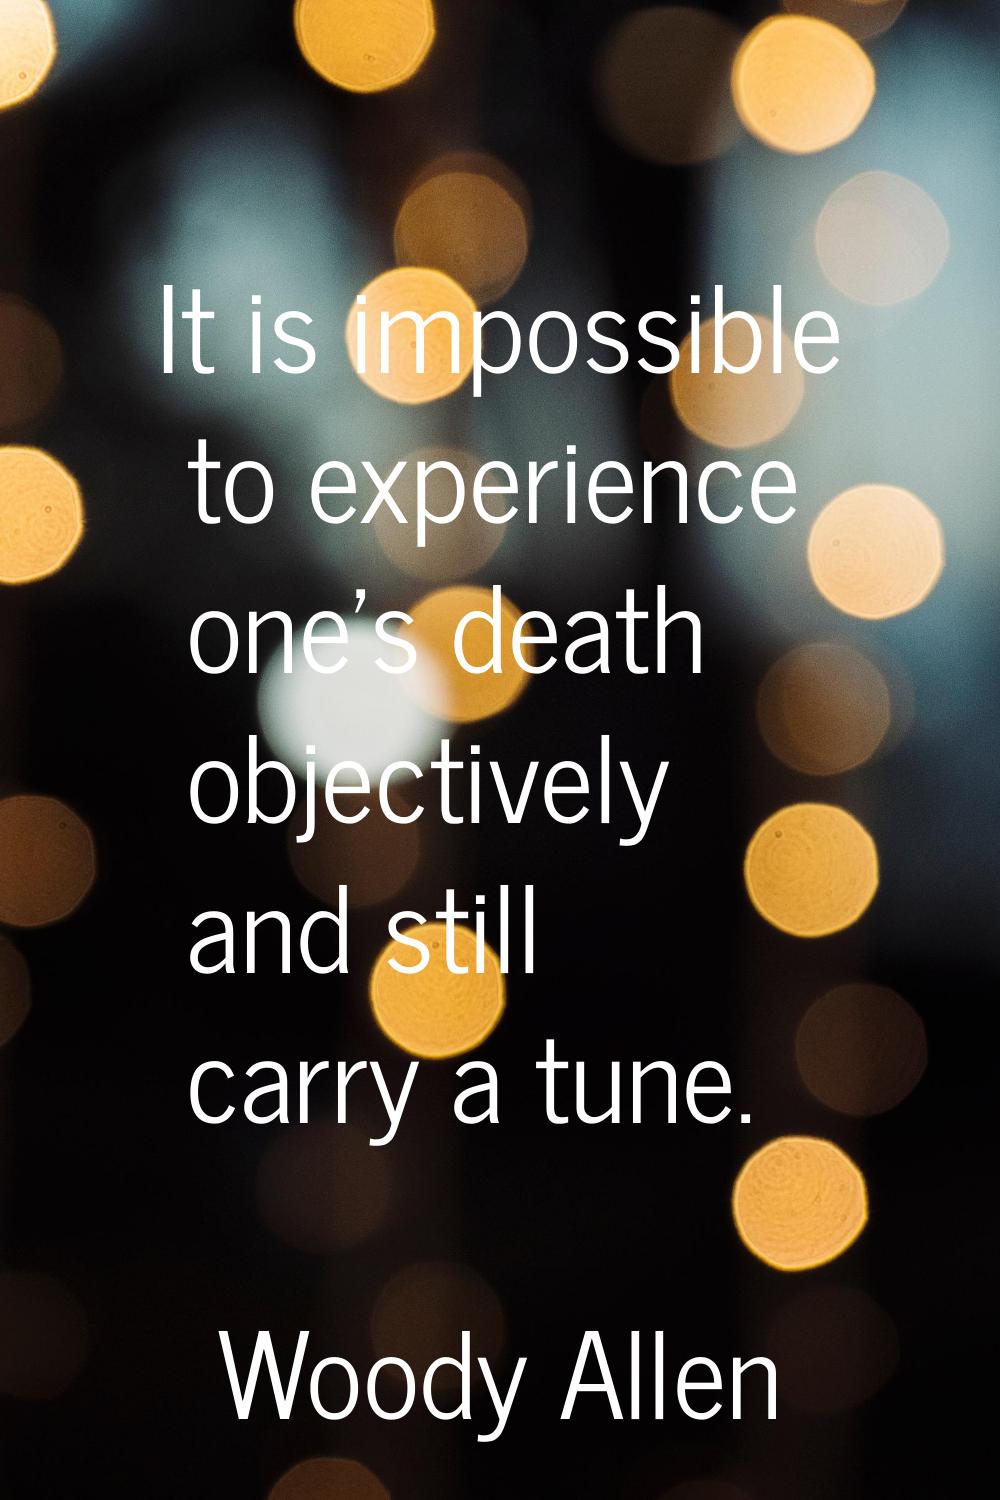 It is impossible to experience one's death objectively and still carry a tune.